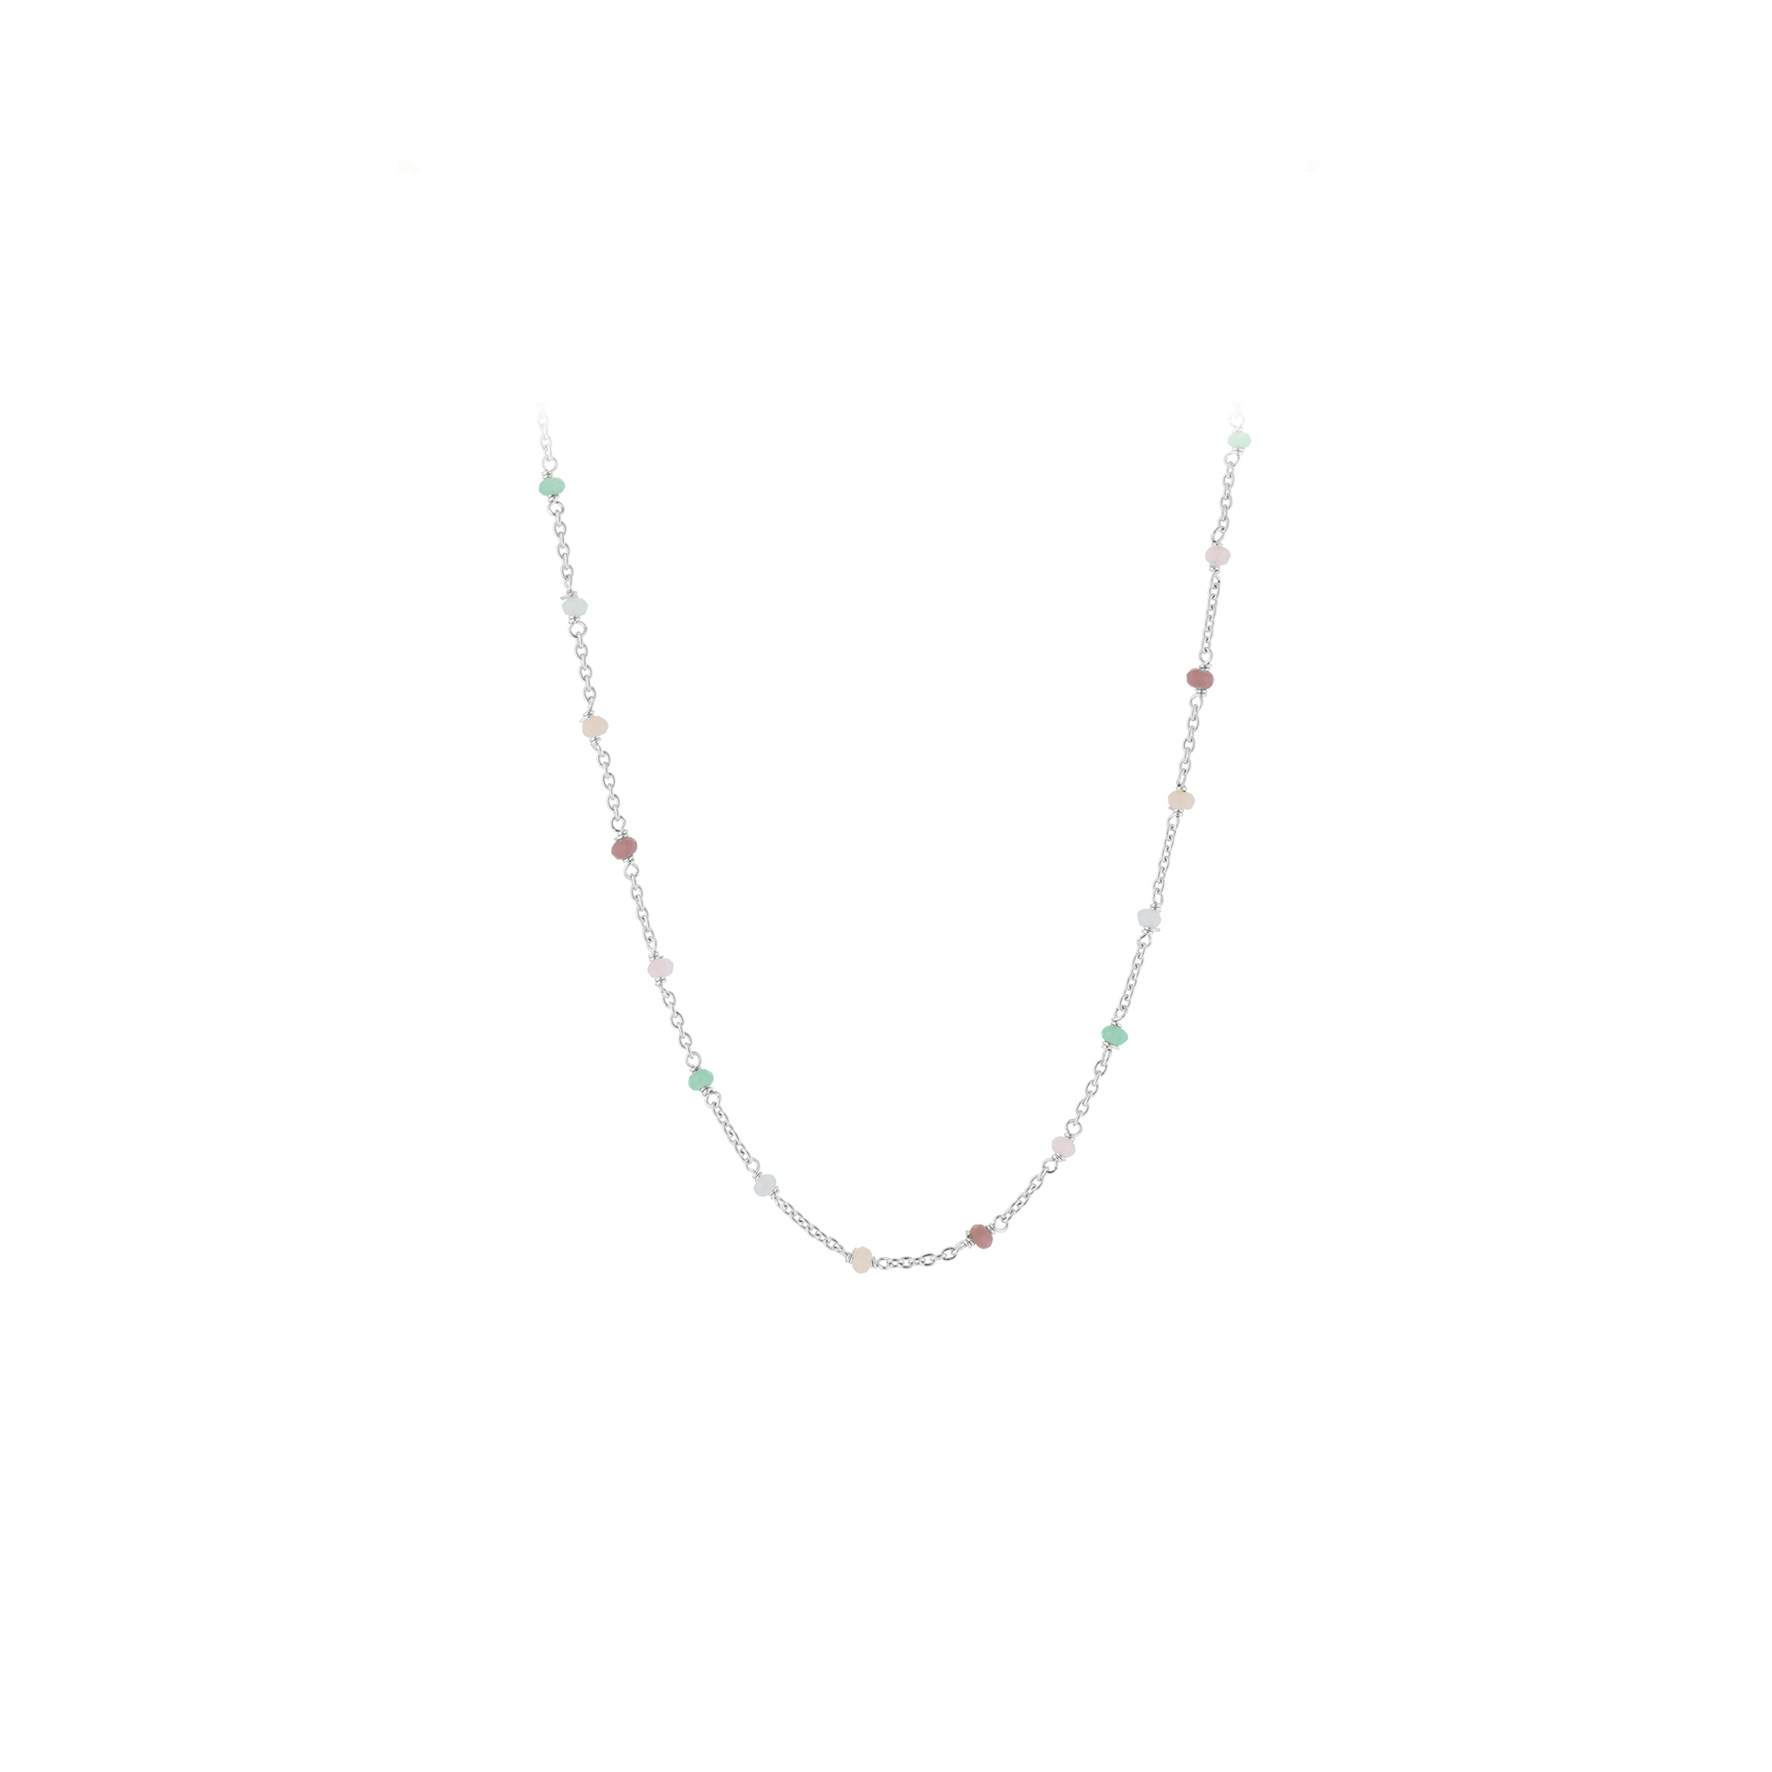 Calisto Necklace from Pernille Corydon in Silver Sterling 925